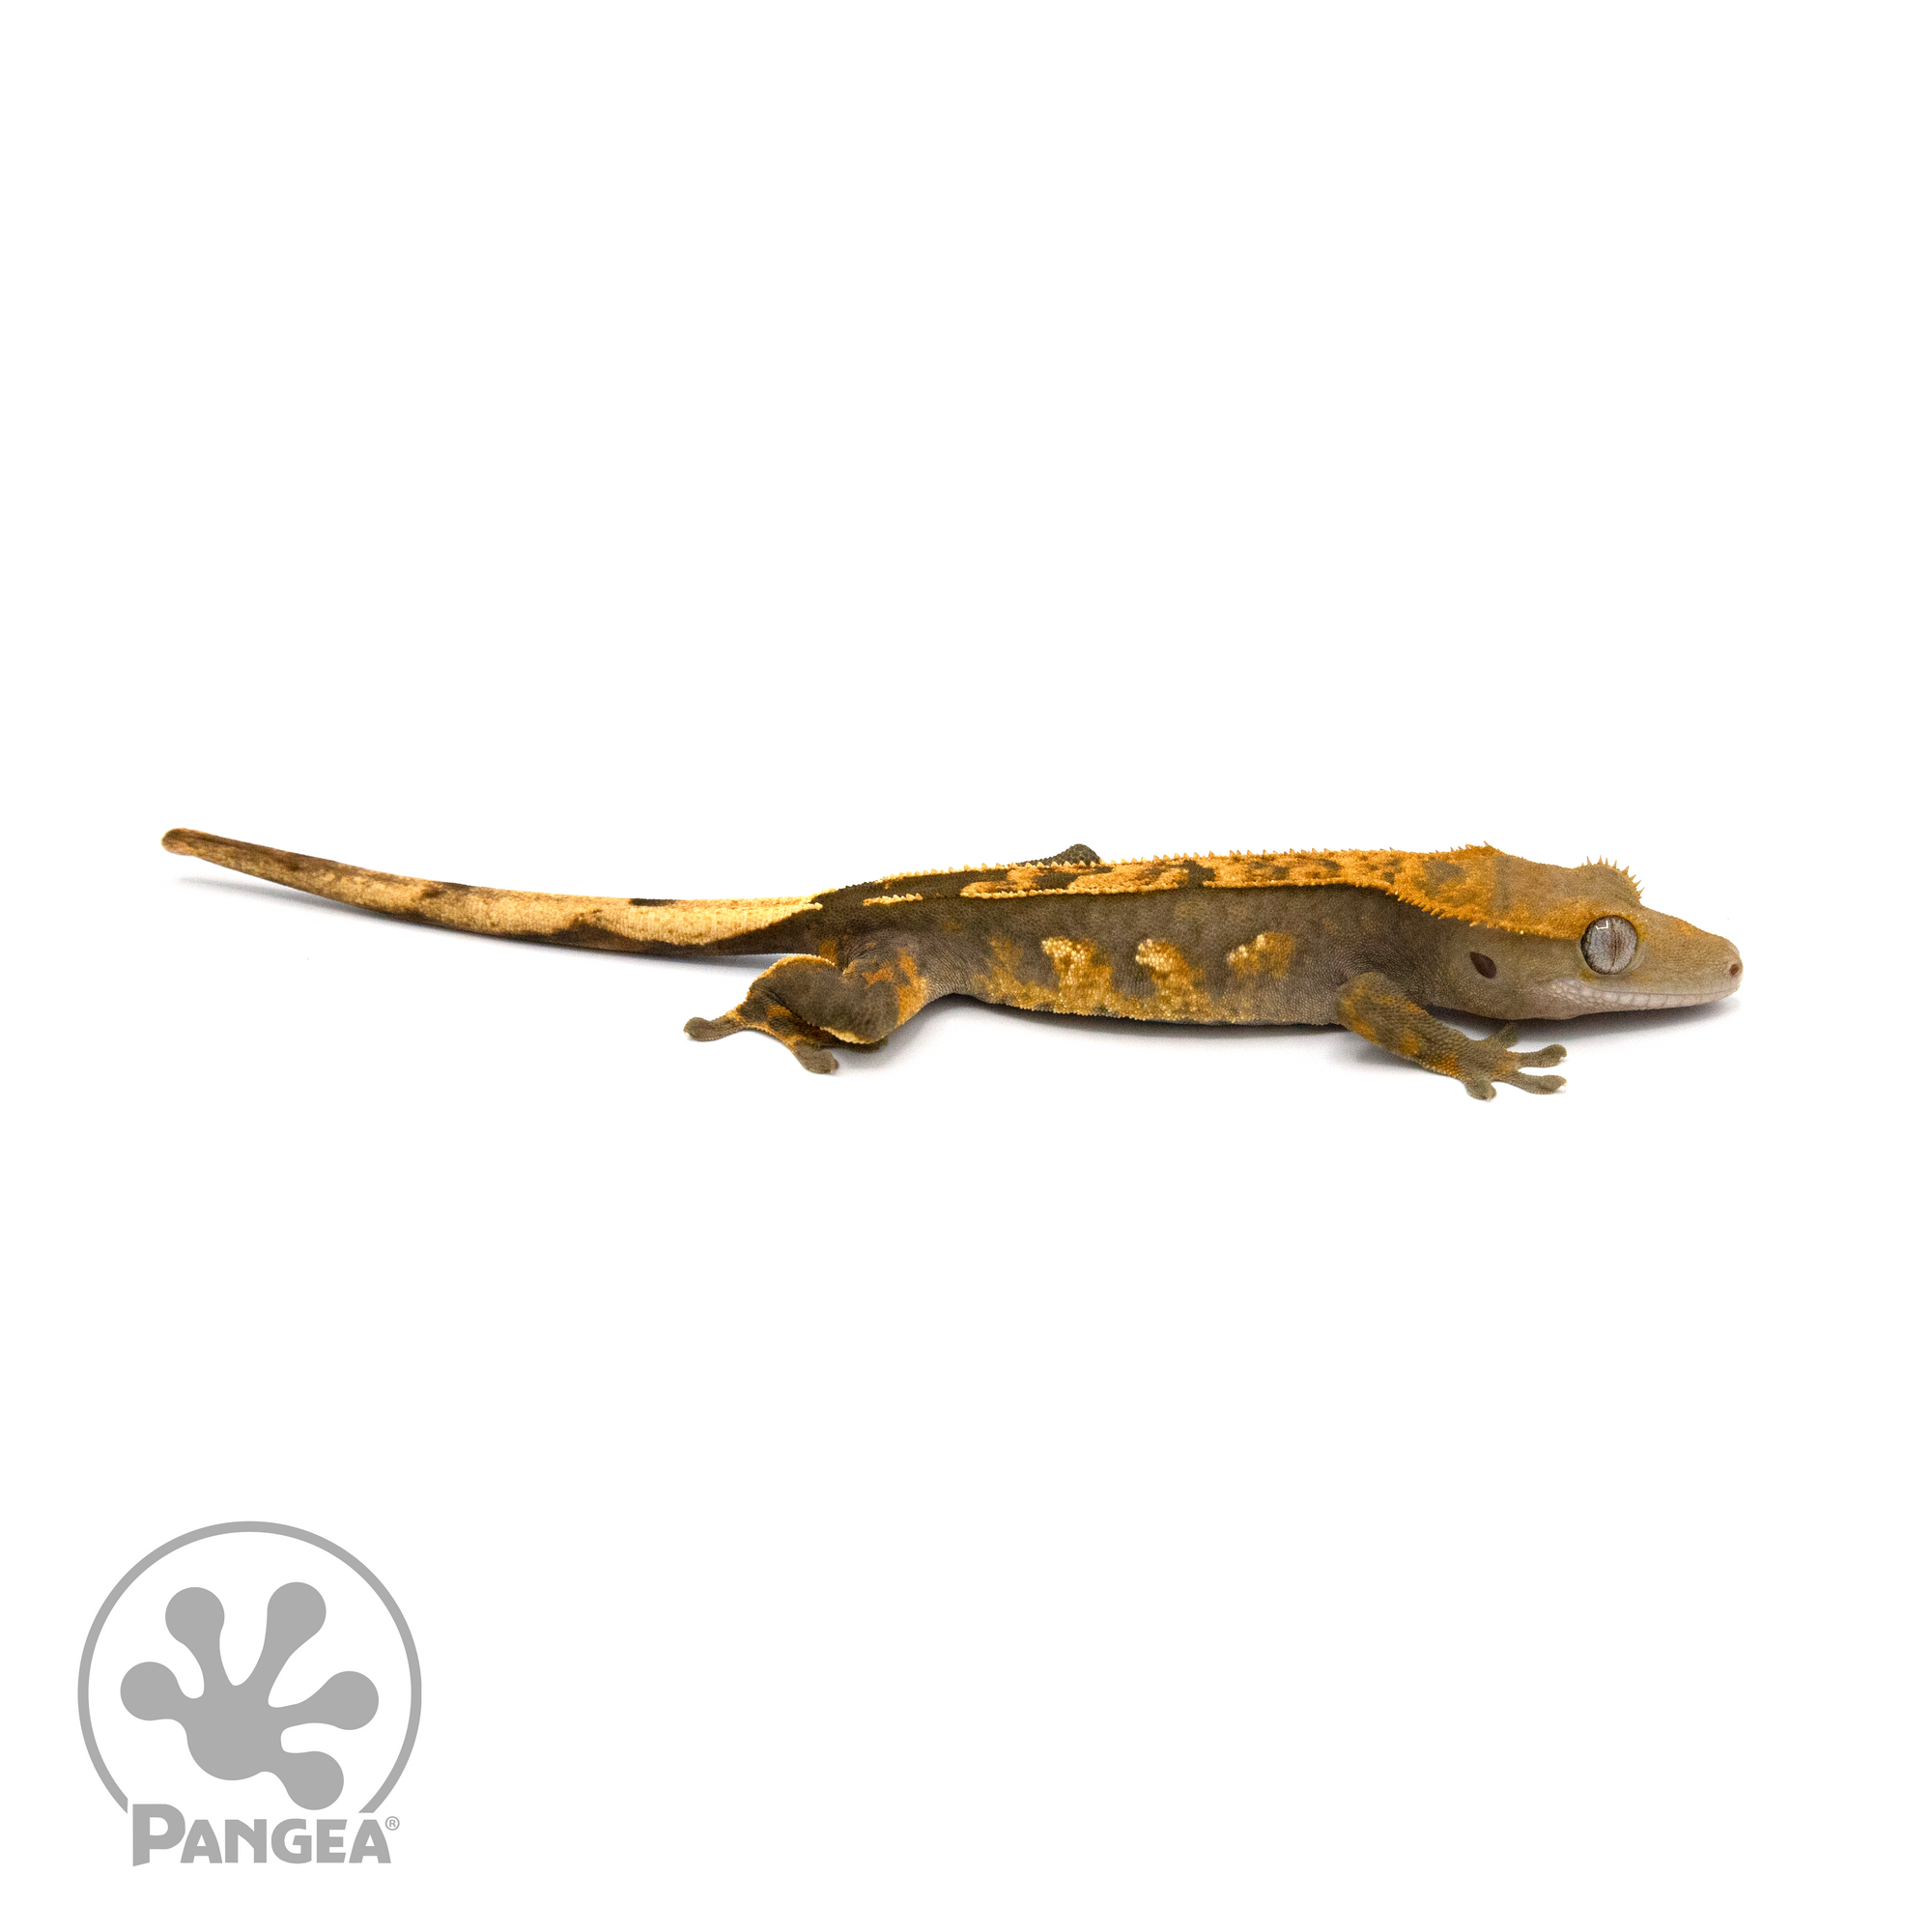 Juvenile Harlequin Crested Gecko Cr-1366 looking right 